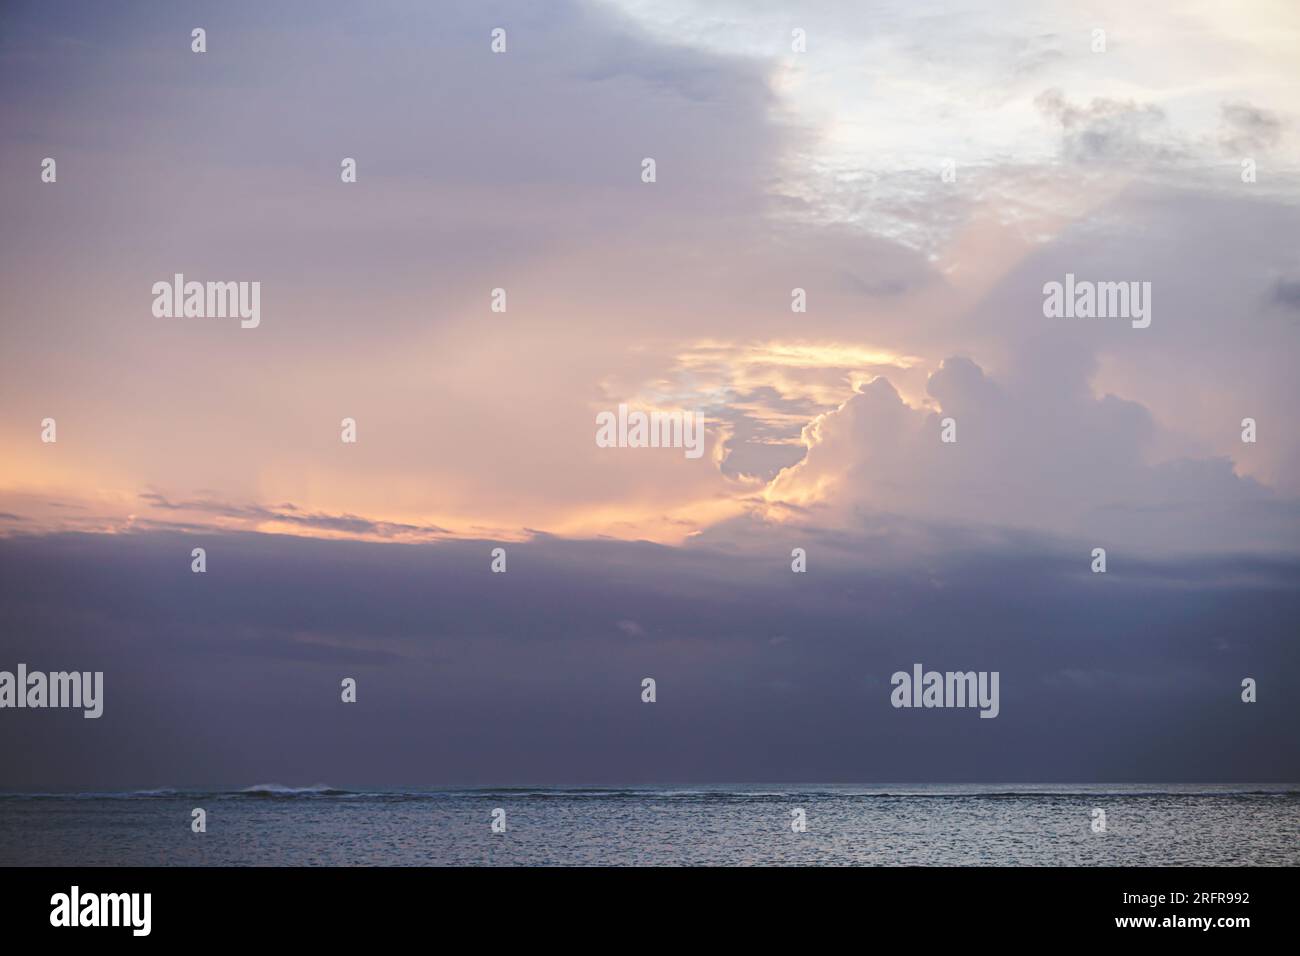 Stormy sky with dramatic clouds from an approaching thunderstorm at sunset Stock Photo